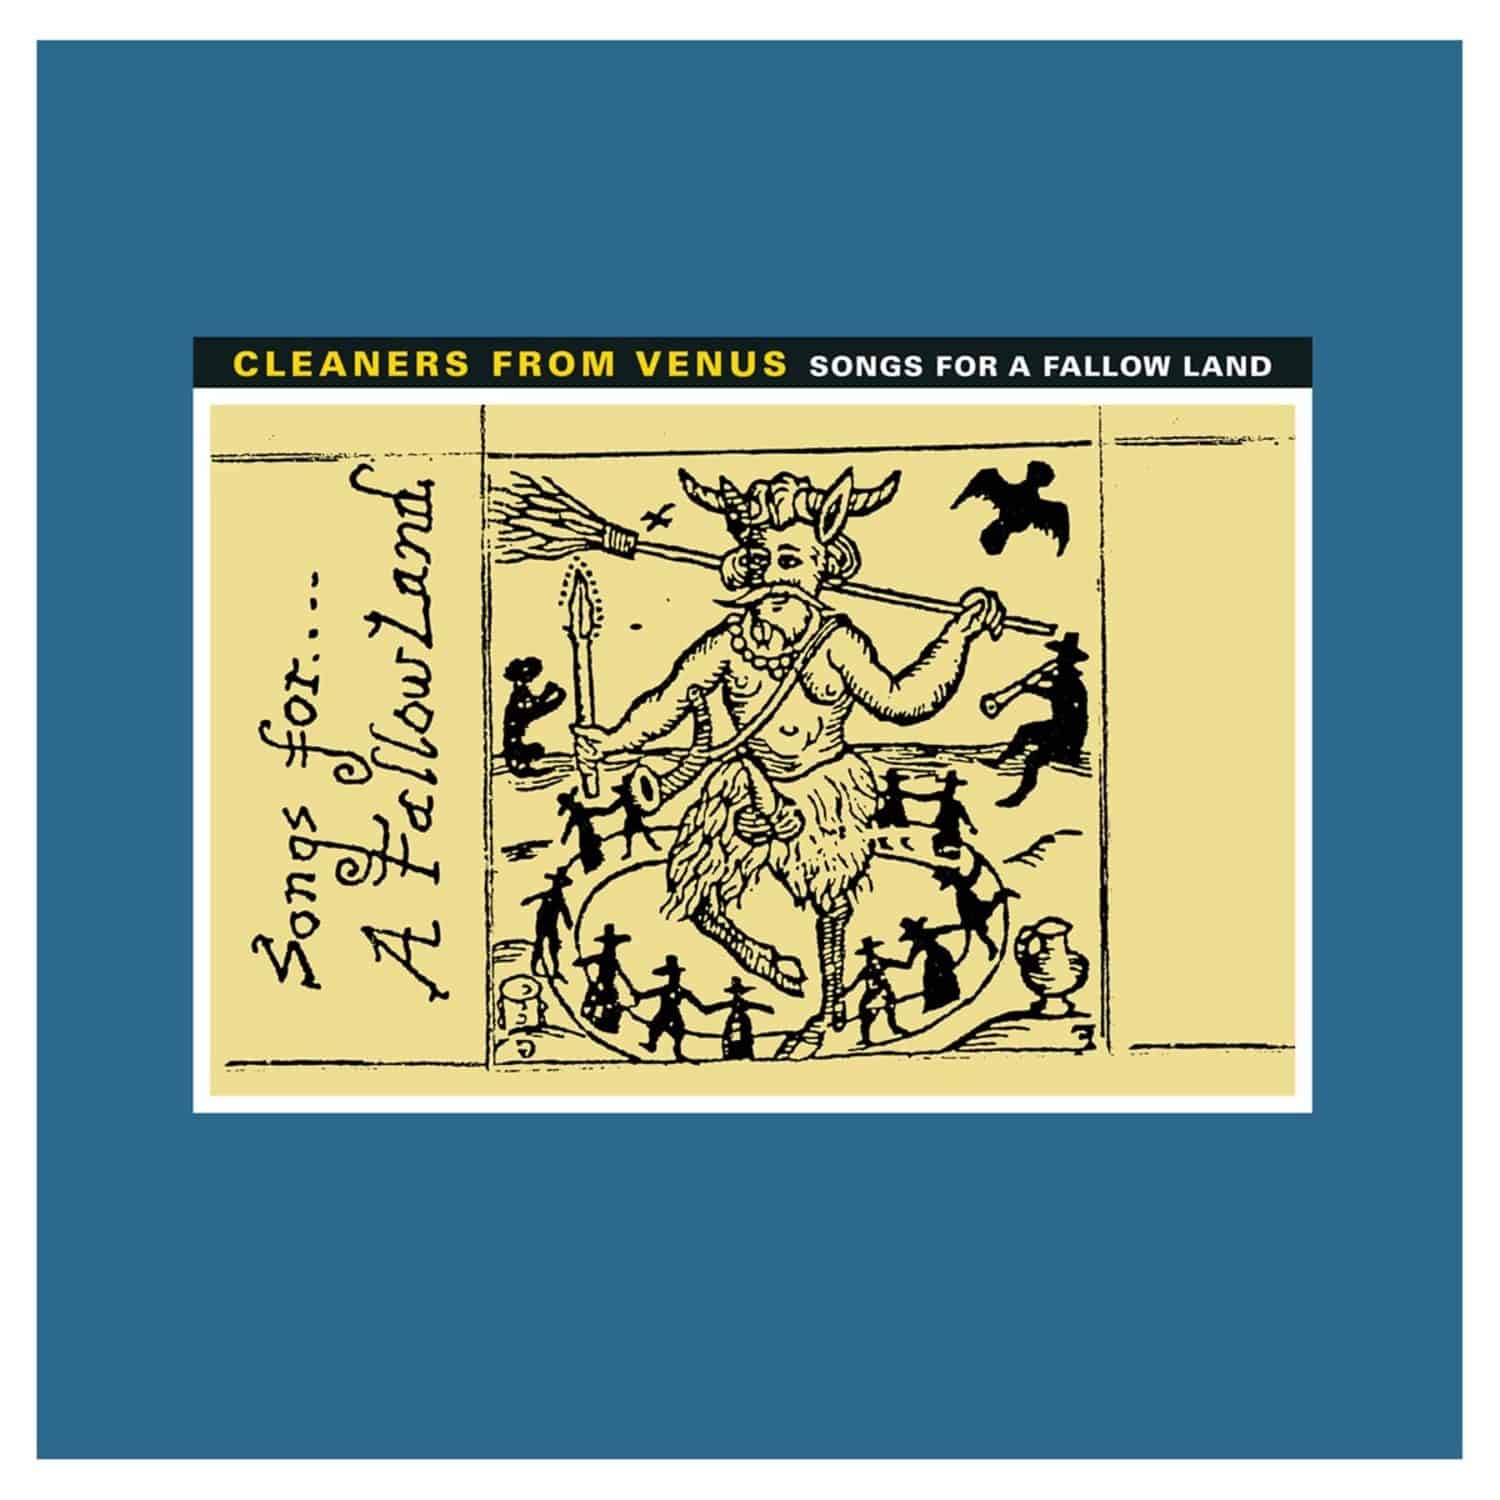 The Cleaners From Venus - SONGS FOR A FALLOW LAND 